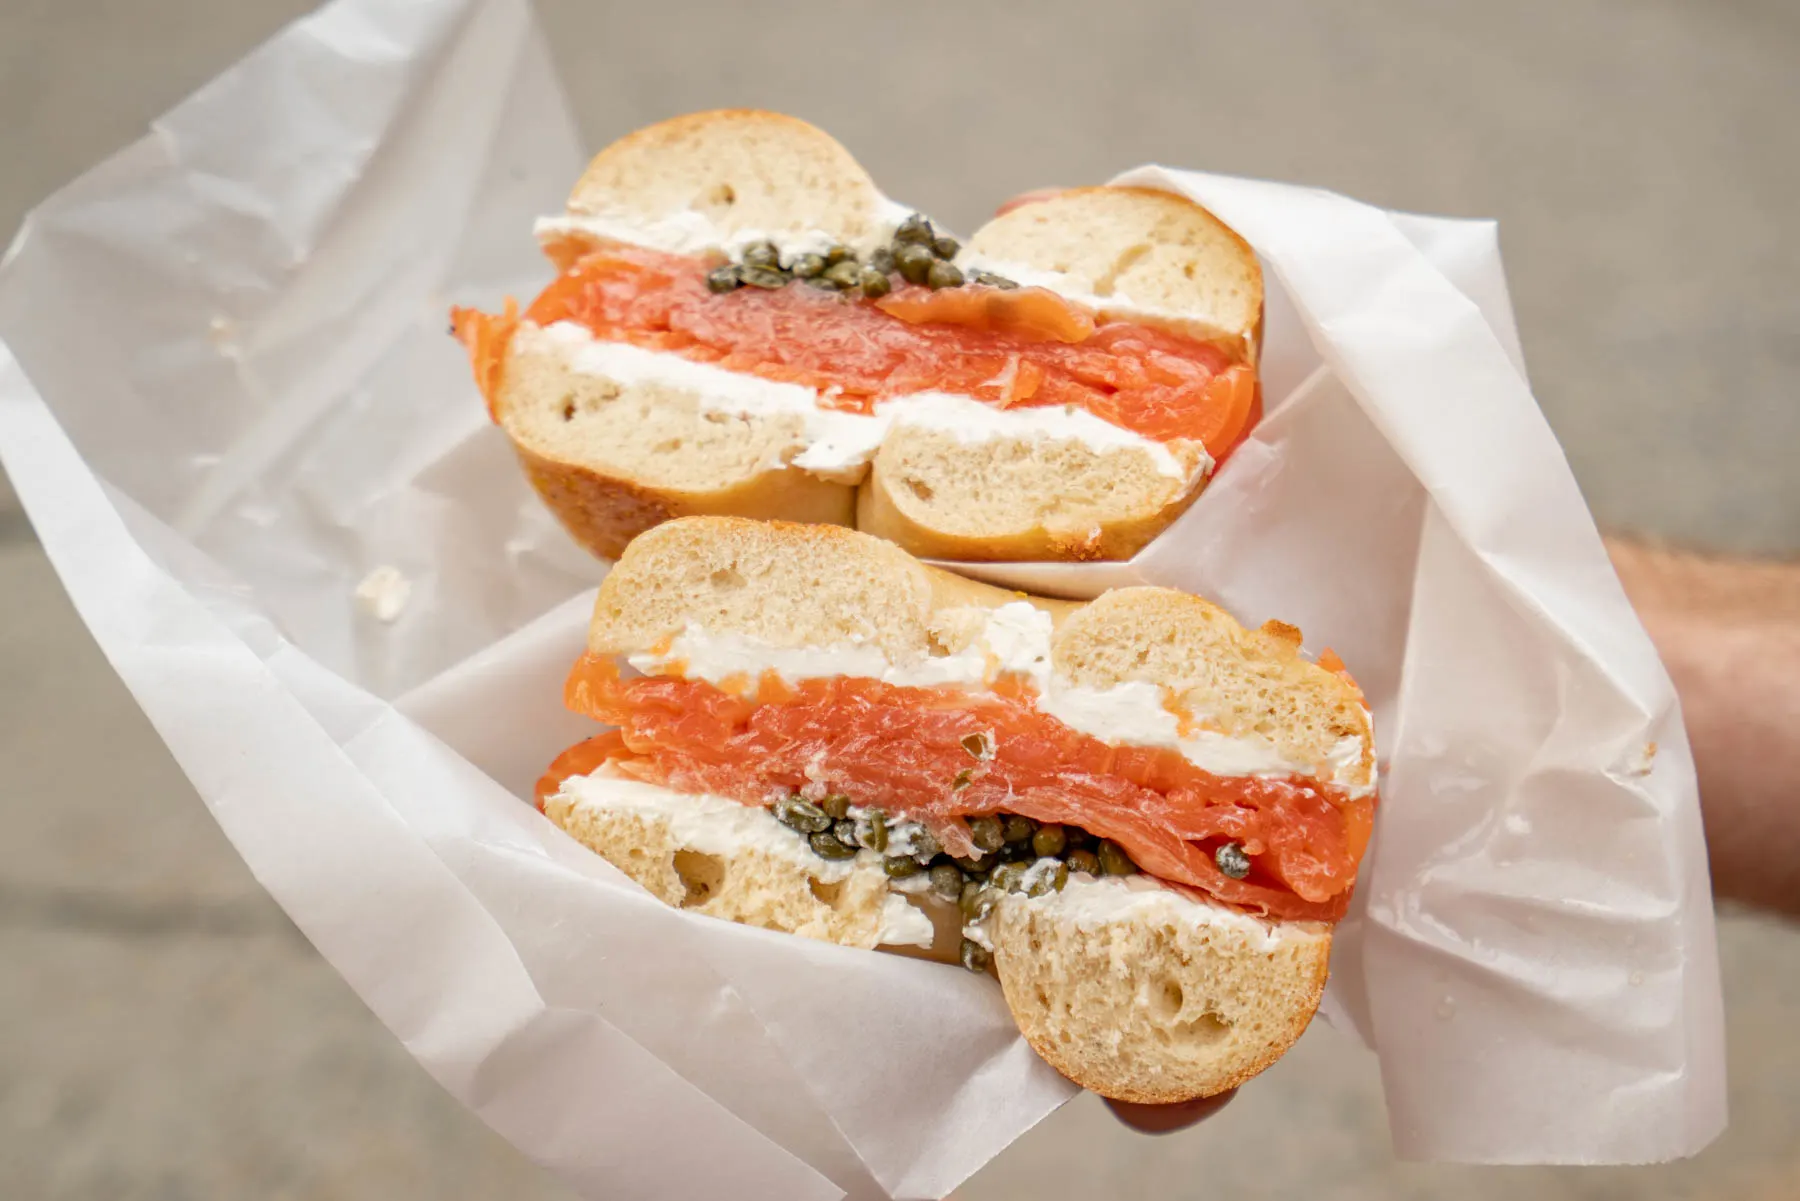 best bagel and lox NYC
Barney Greengrass Lox 